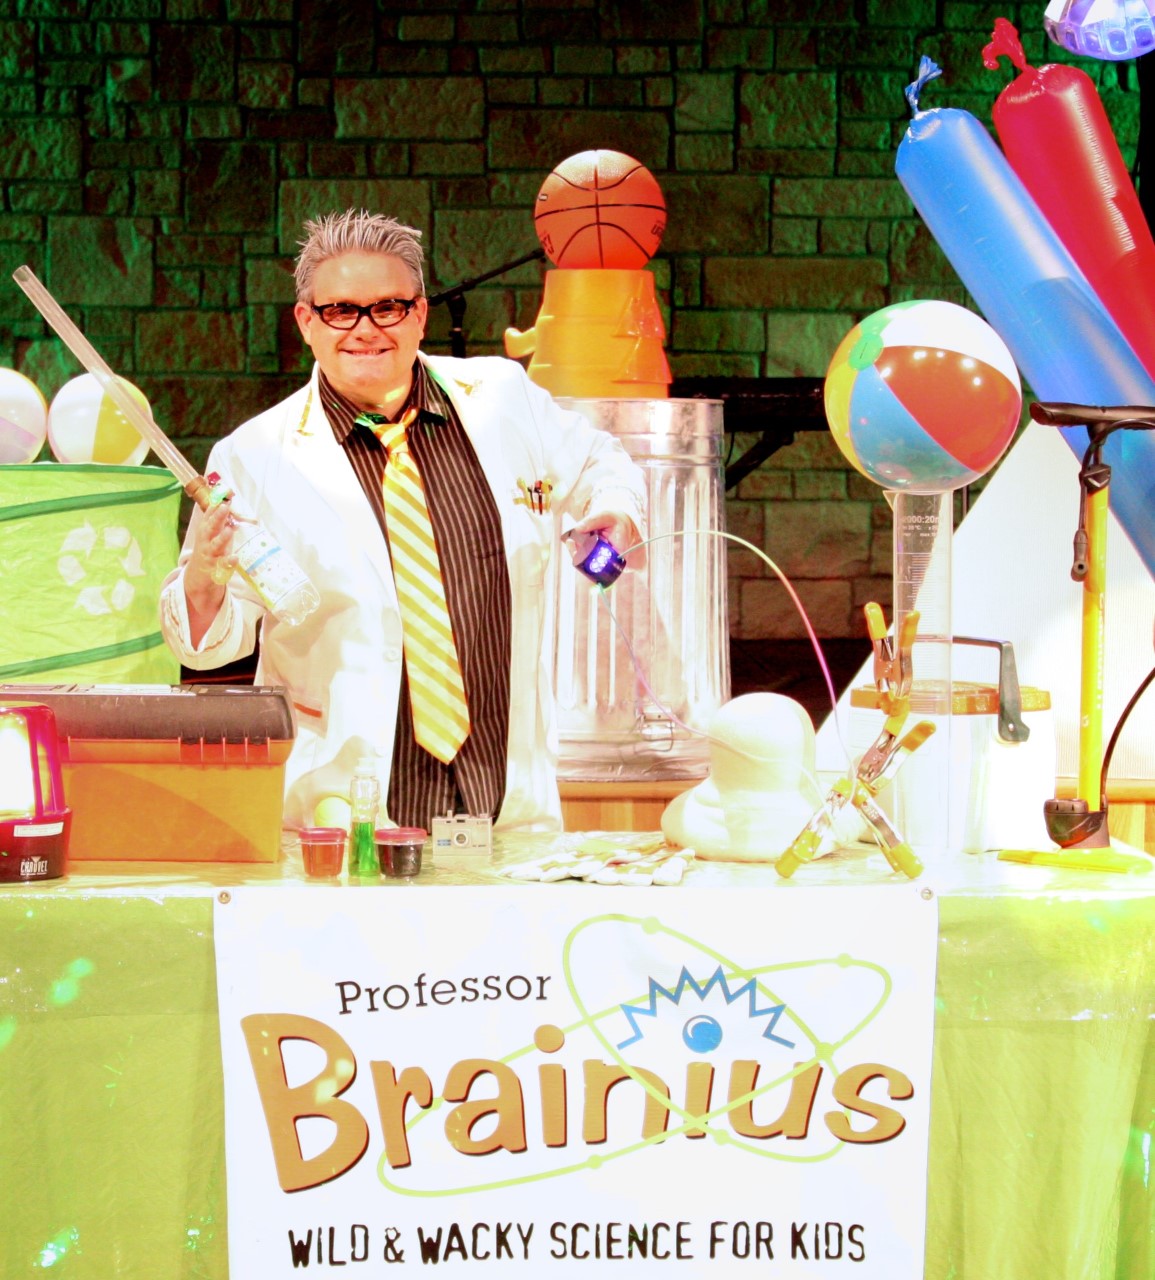 Professor Brainius stands behind a desk filled with science equipment